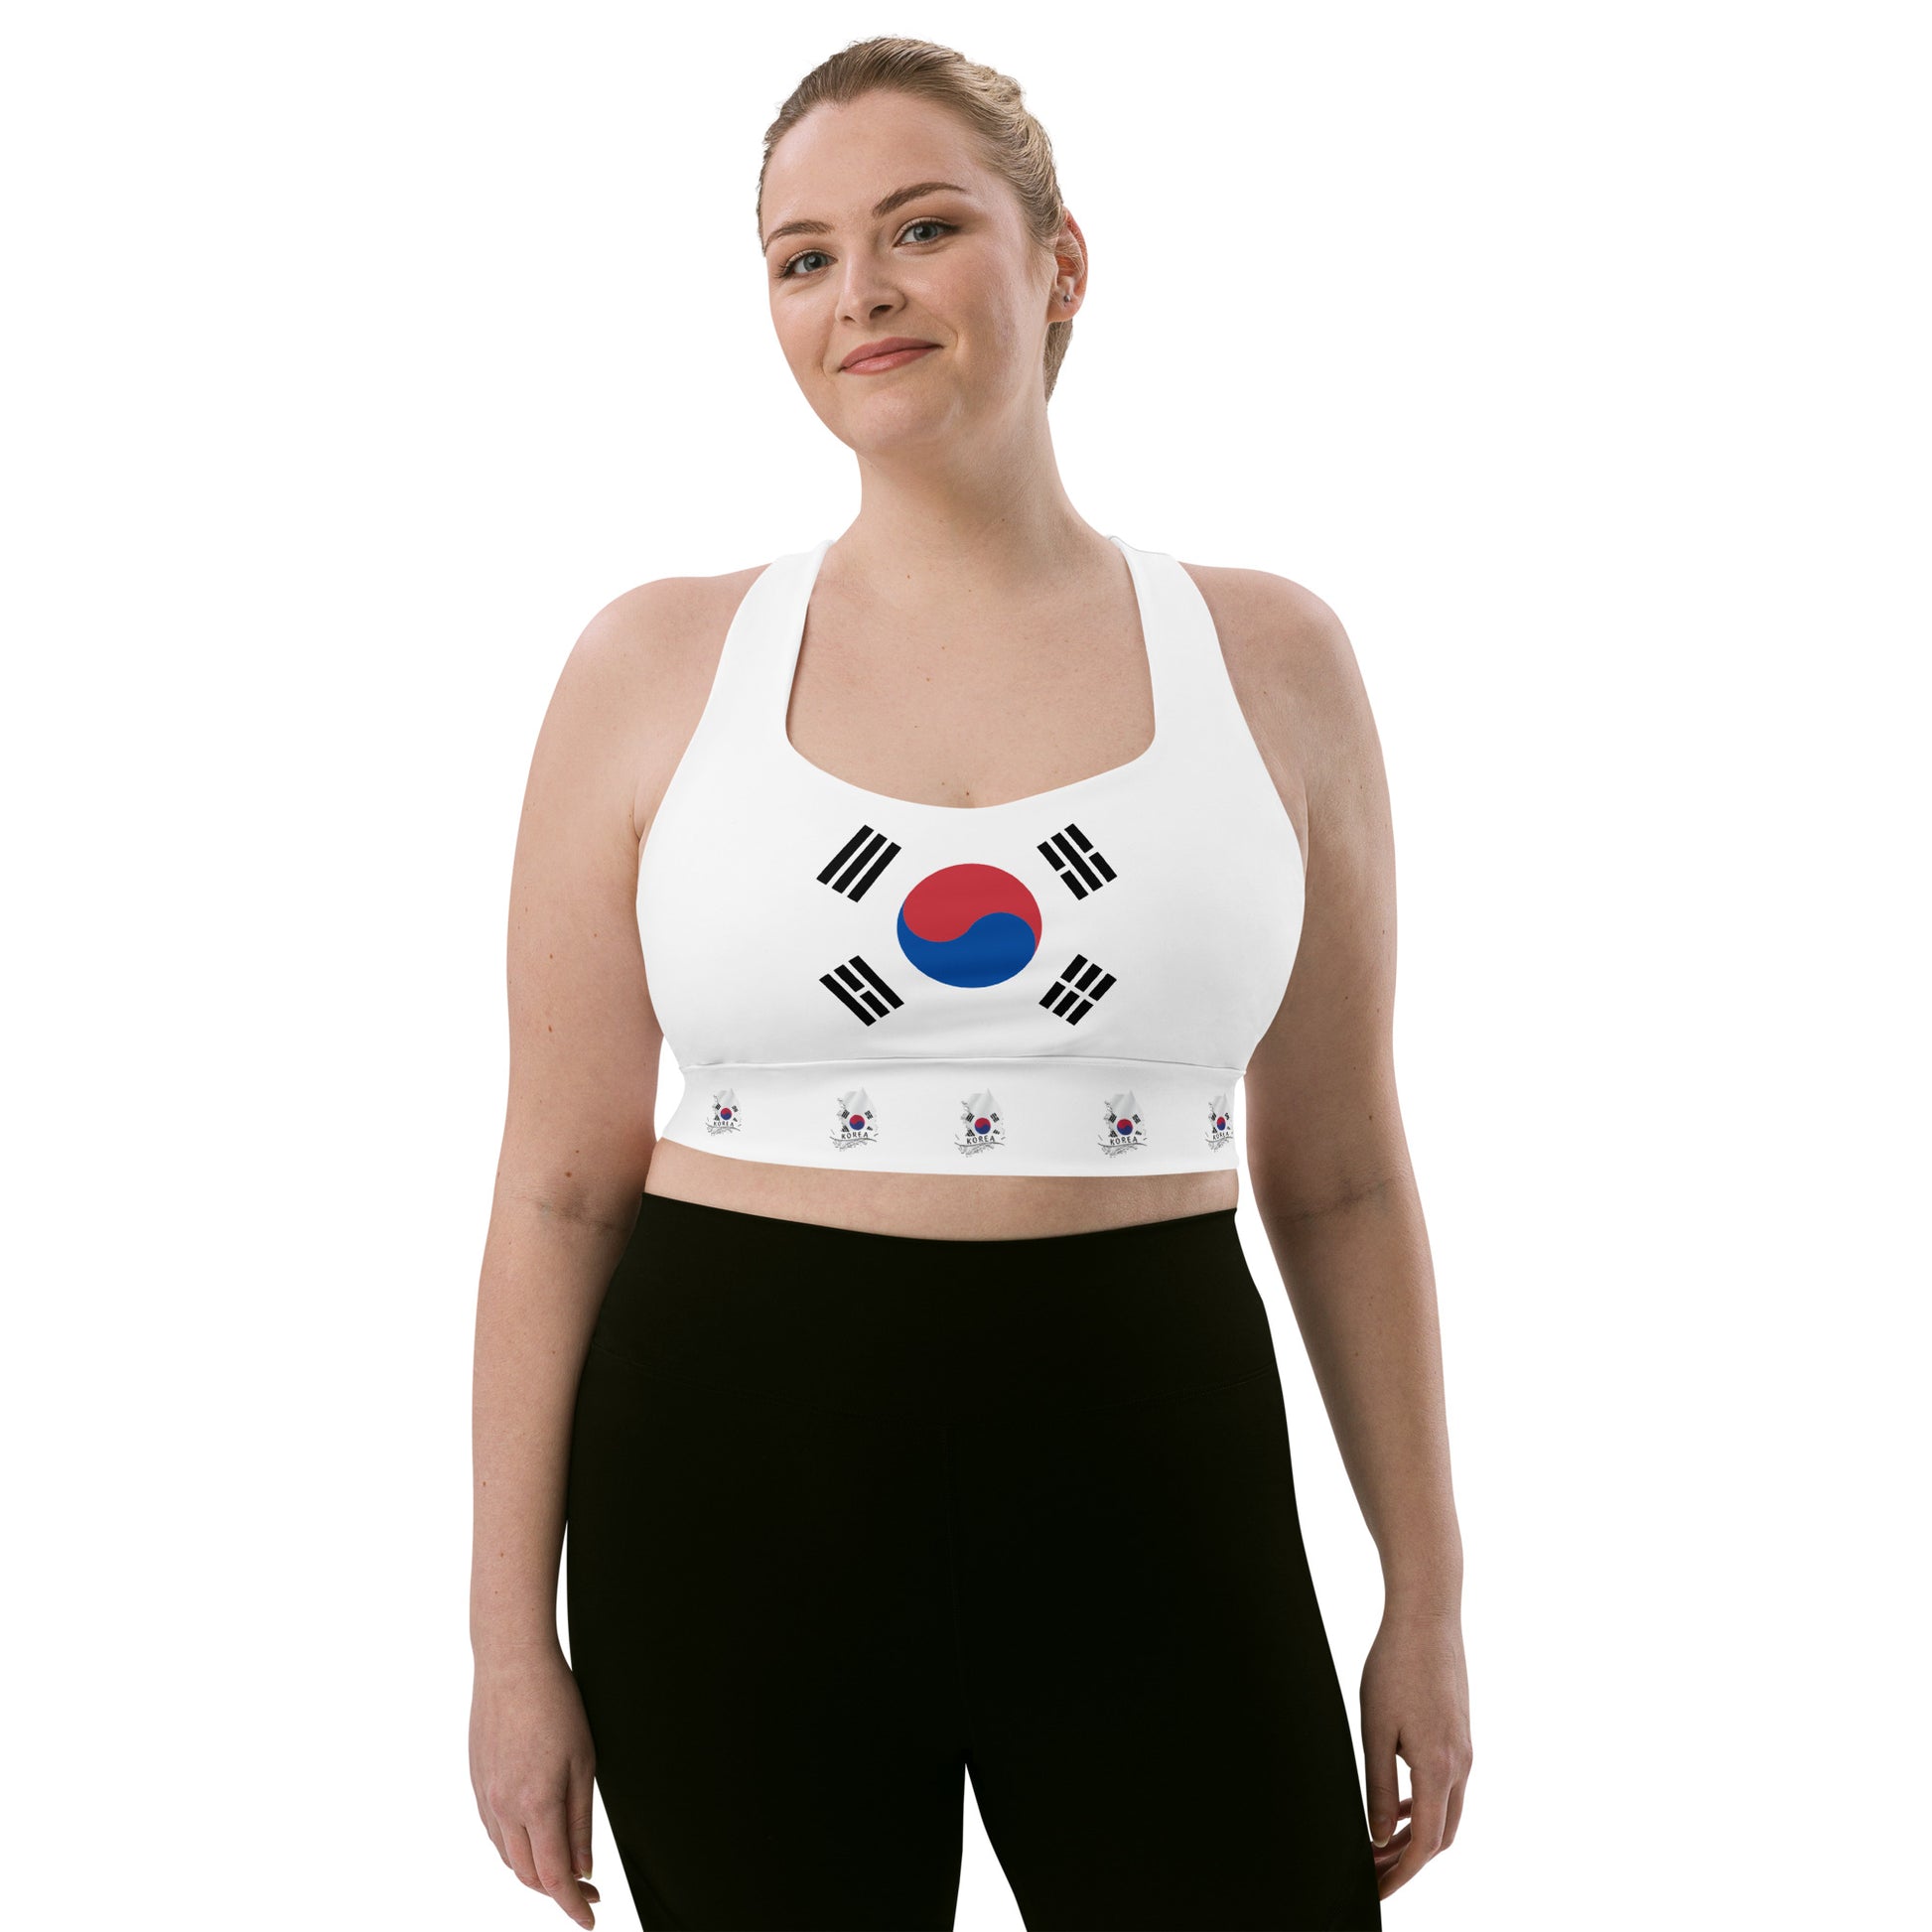 Where to Buy a Longline Padded Sports Bra in a South Korean Flag Print? Here!